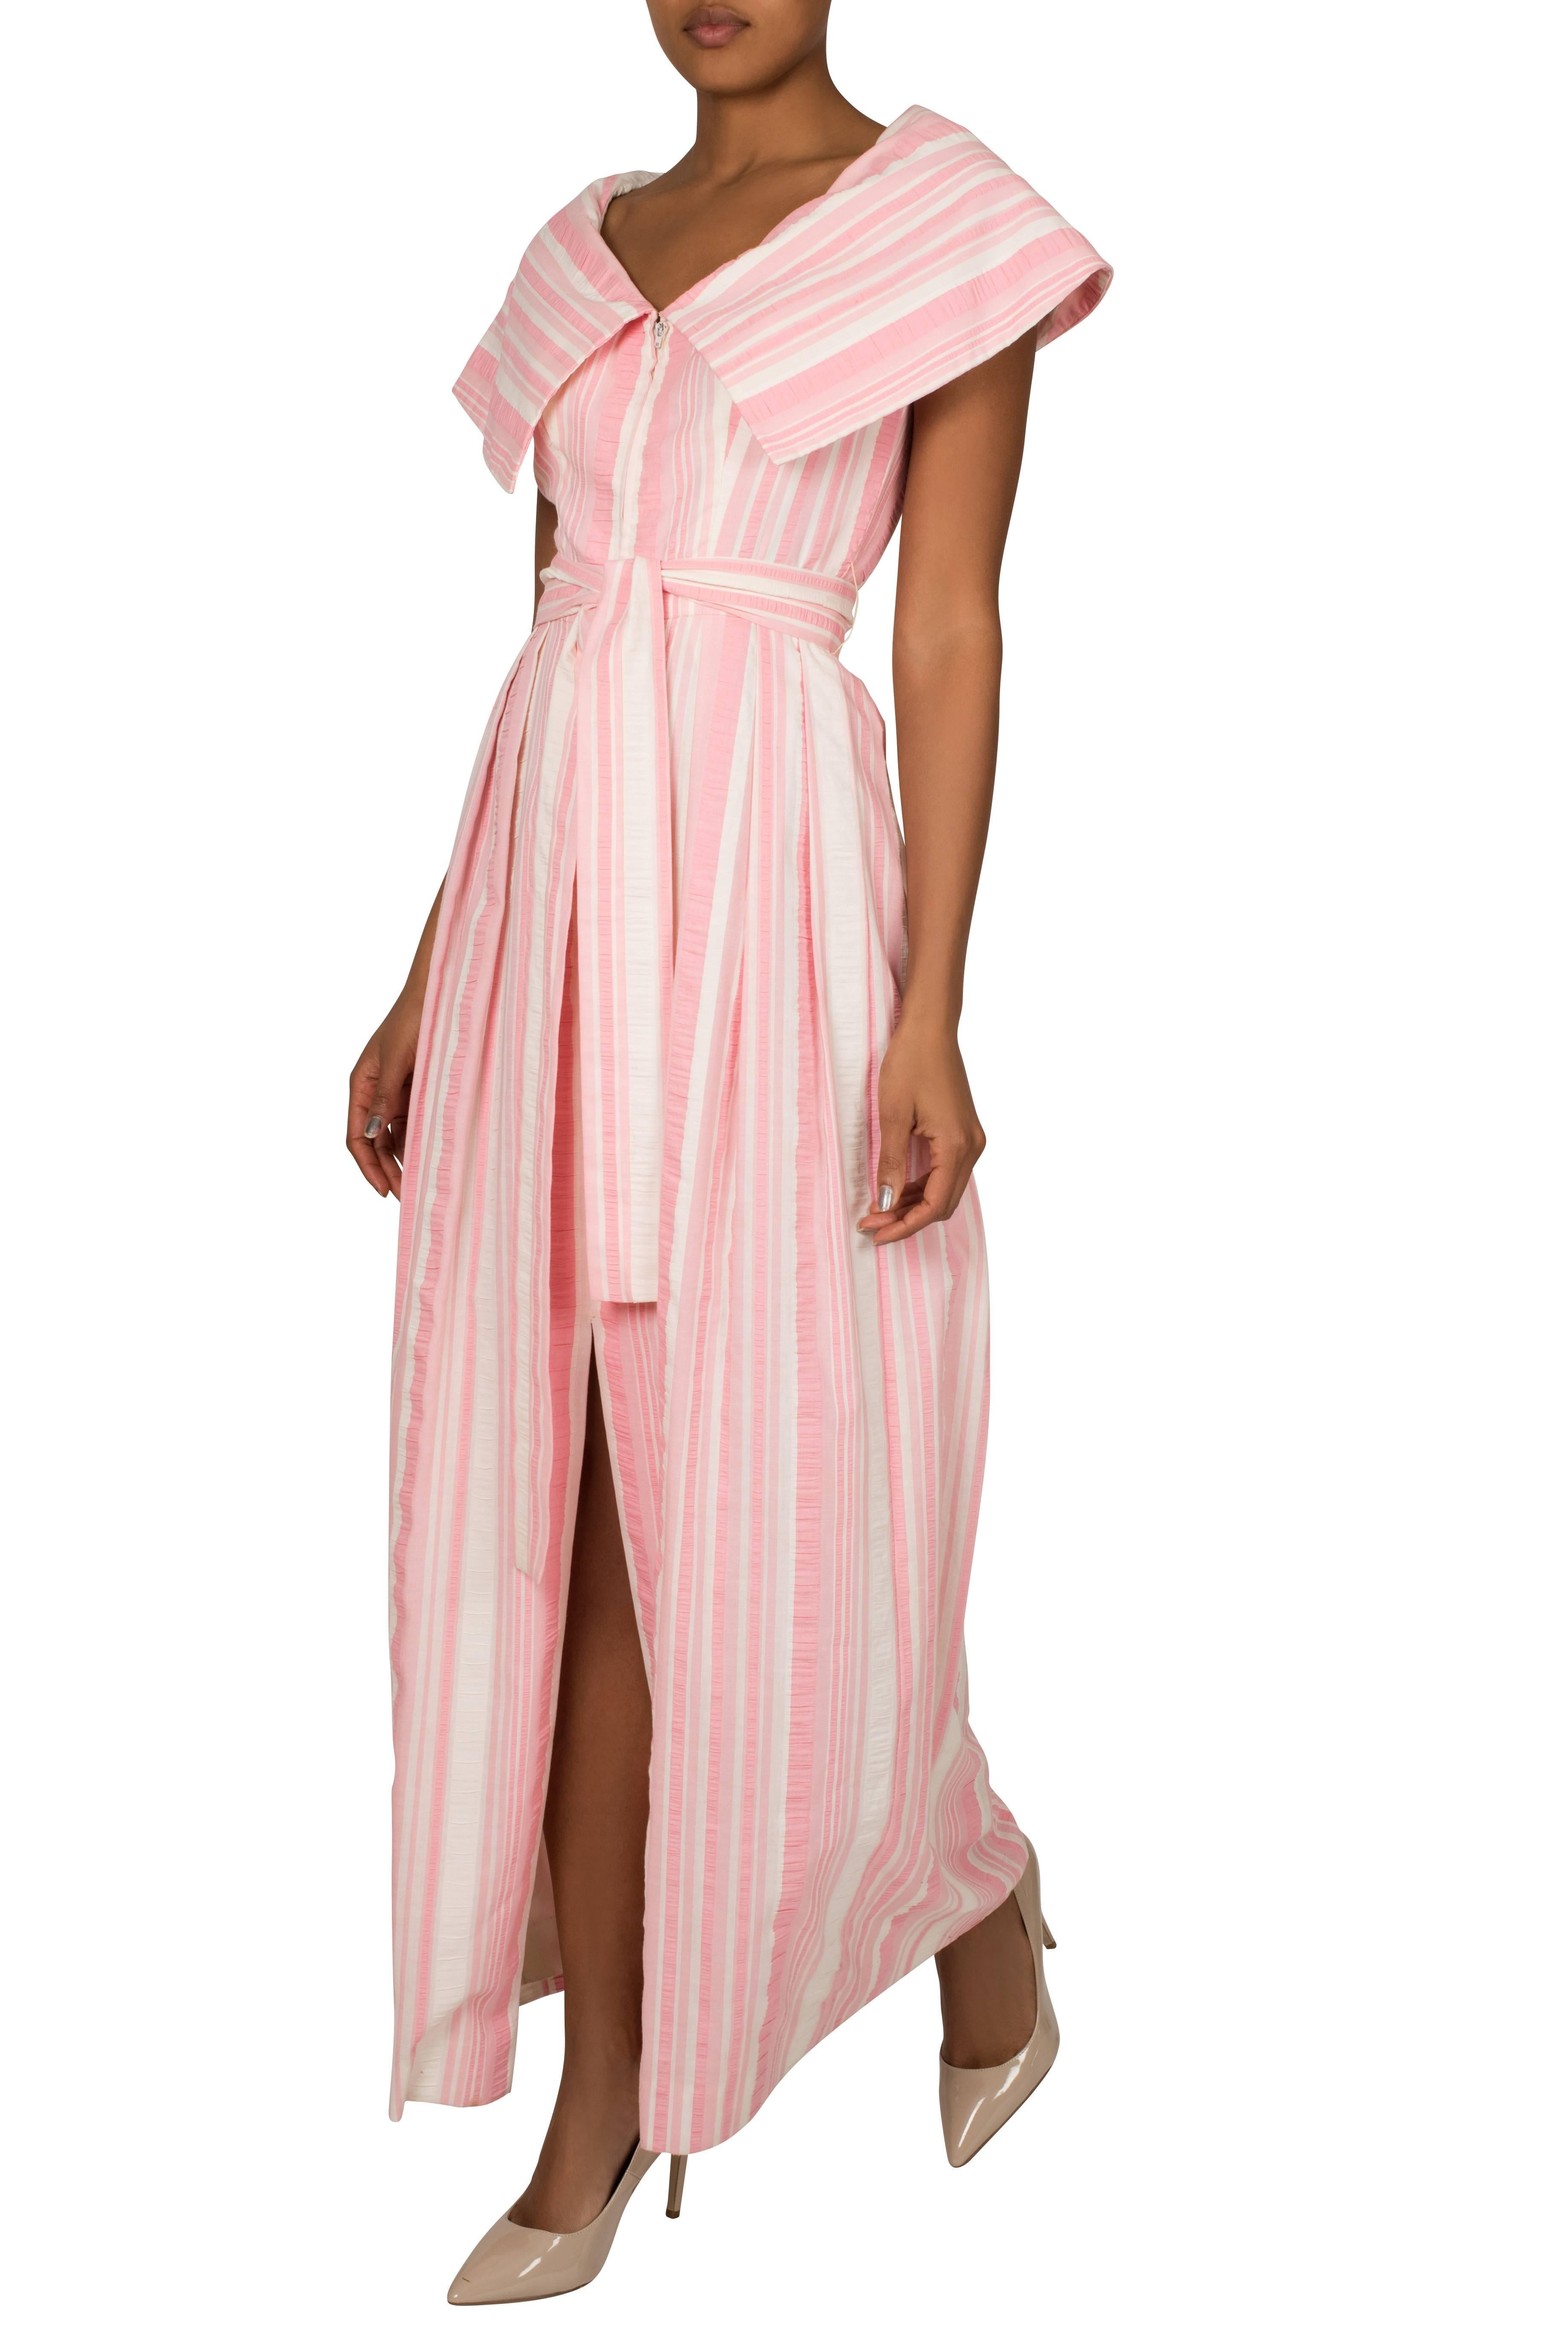 This cute 1970s Estevez V neck dress has a front zip opening with capelet style overlay around the shoulders. The fabric is a modern take on the classic pink seersucker stripe. The garment also features a matching tie waist belt, which accentuates